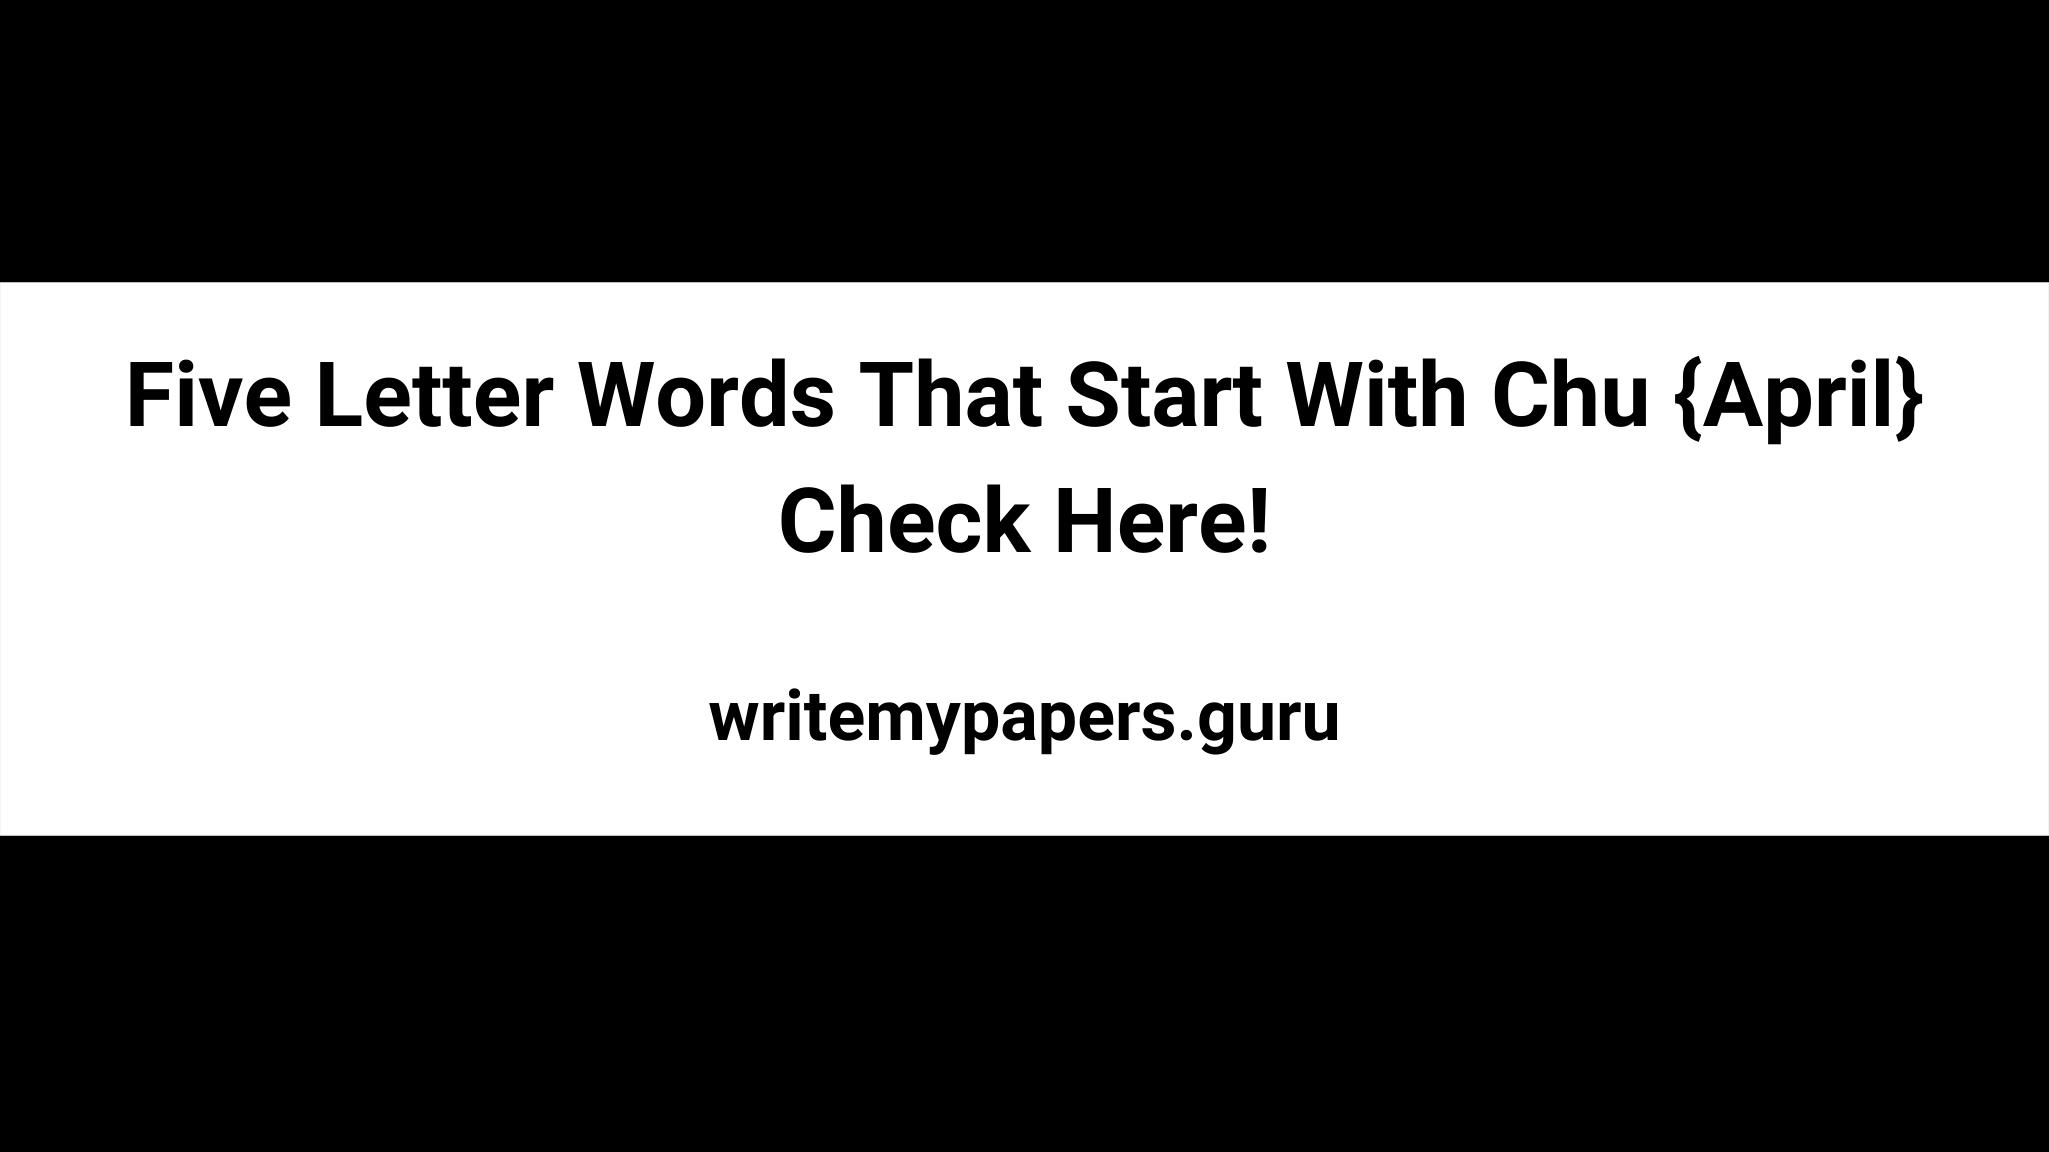 Five Letter Words That Start With Chu